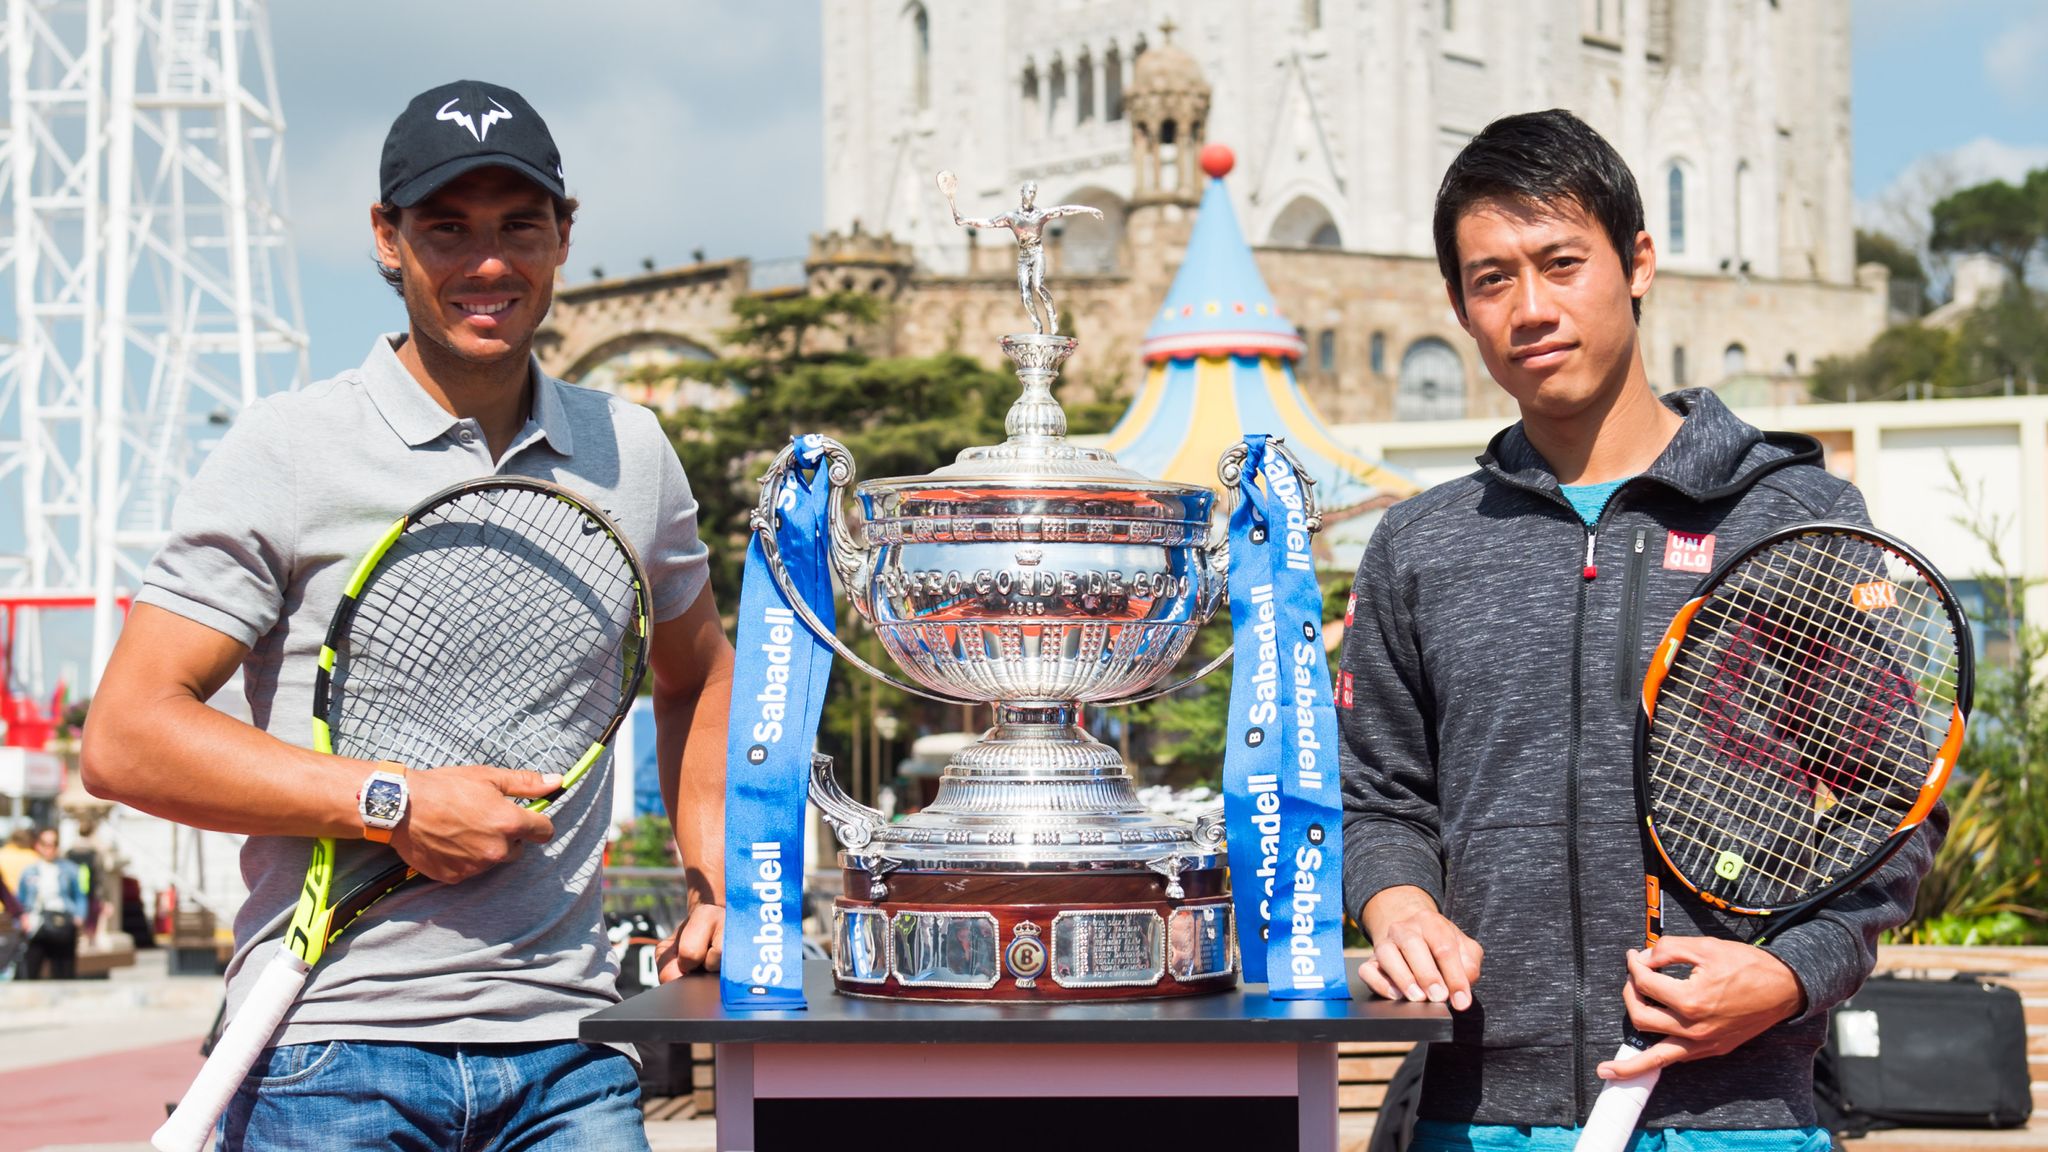 Rafael Nadal and Kei Nishikori can set up a thrilling final at the Barcelona Open Tennis News Sky Sports